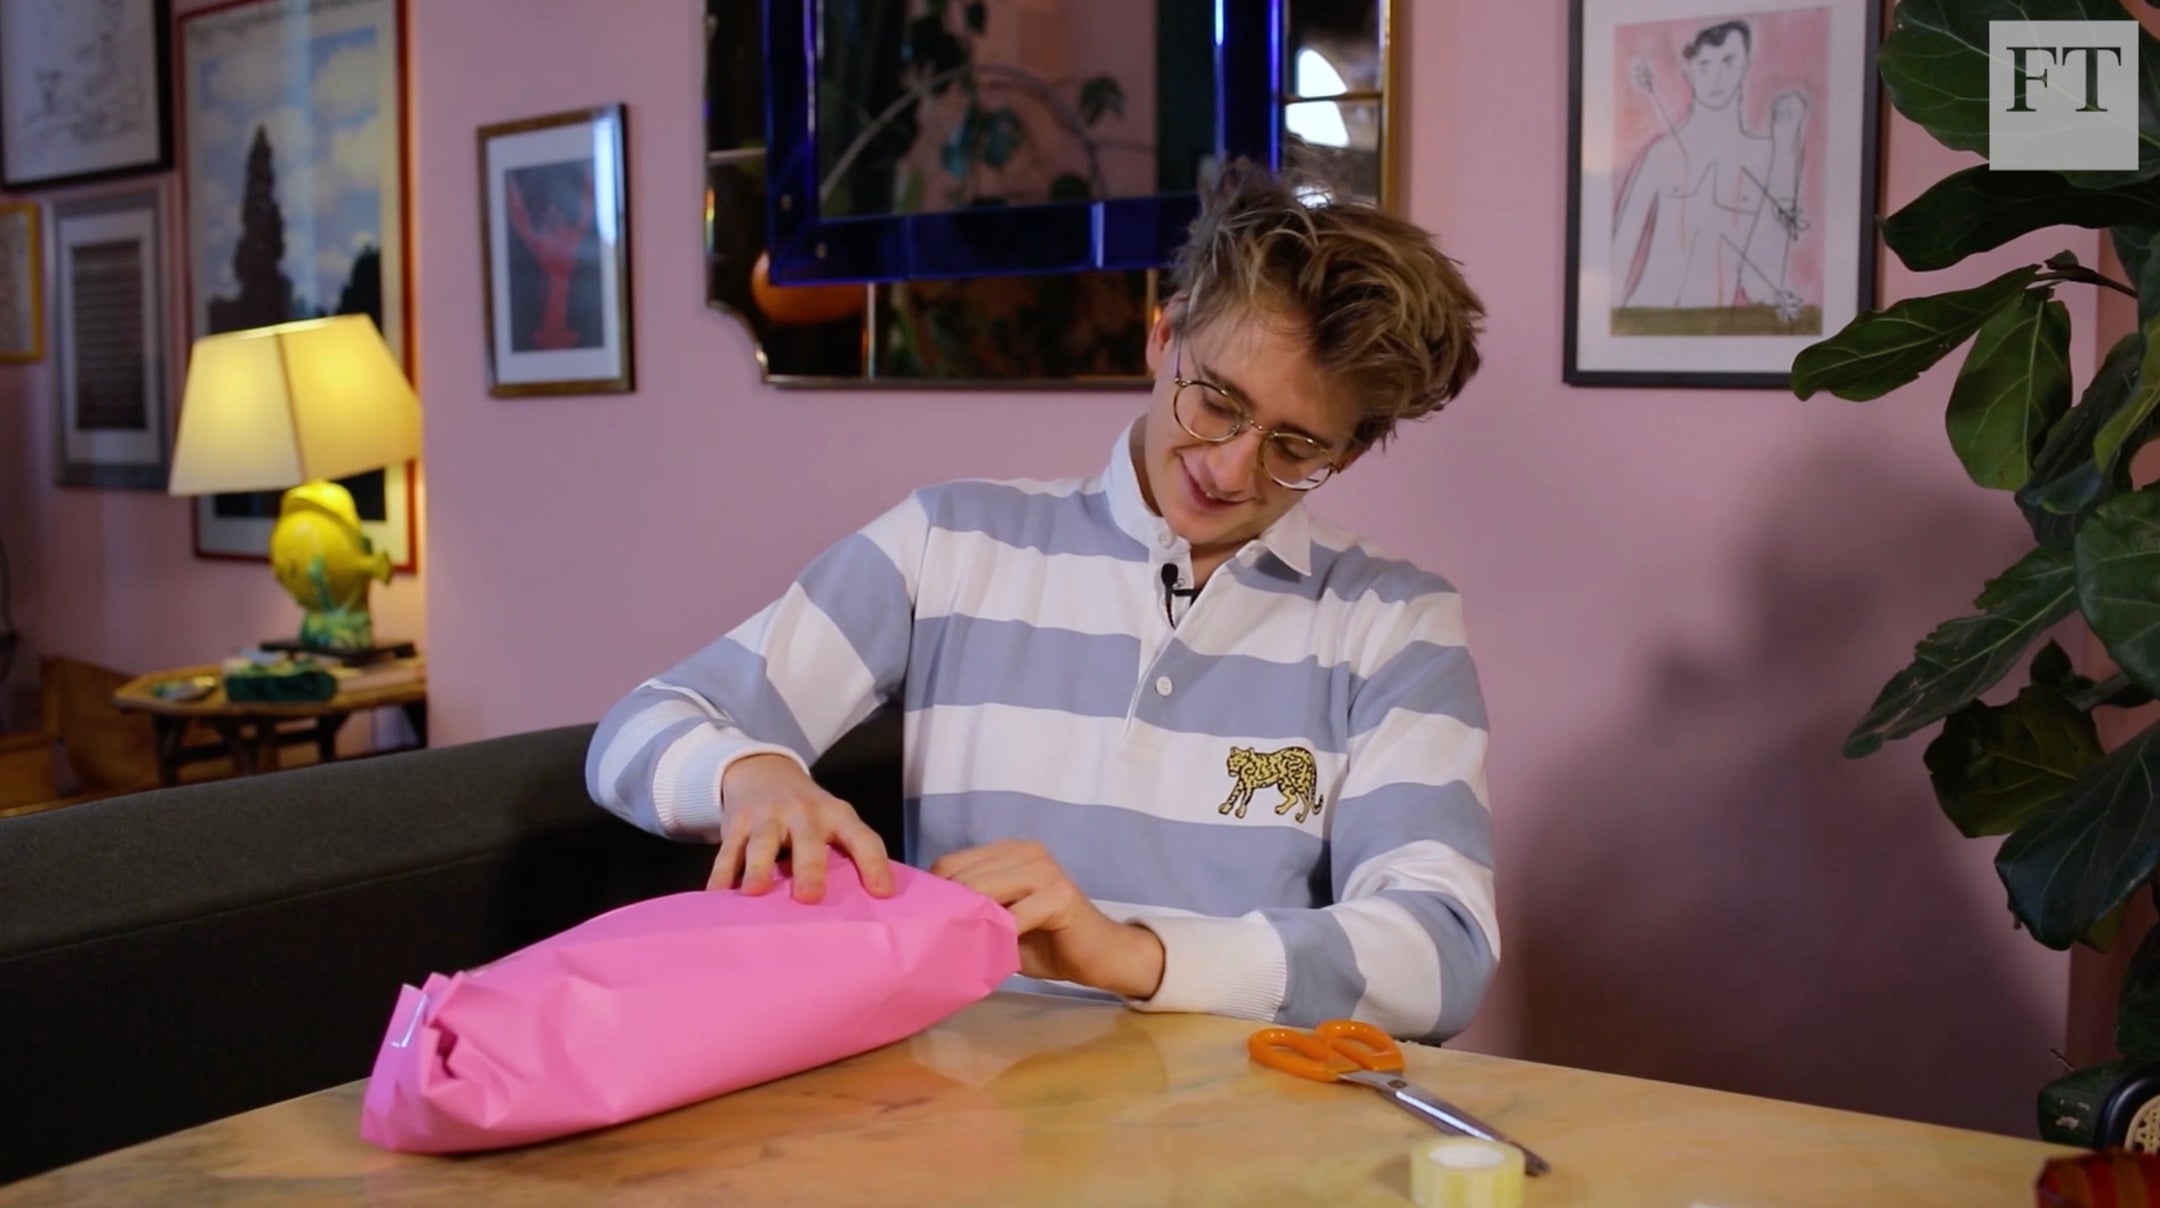 Luke Edward Hall on Gift Wrapping (Financial Times video)